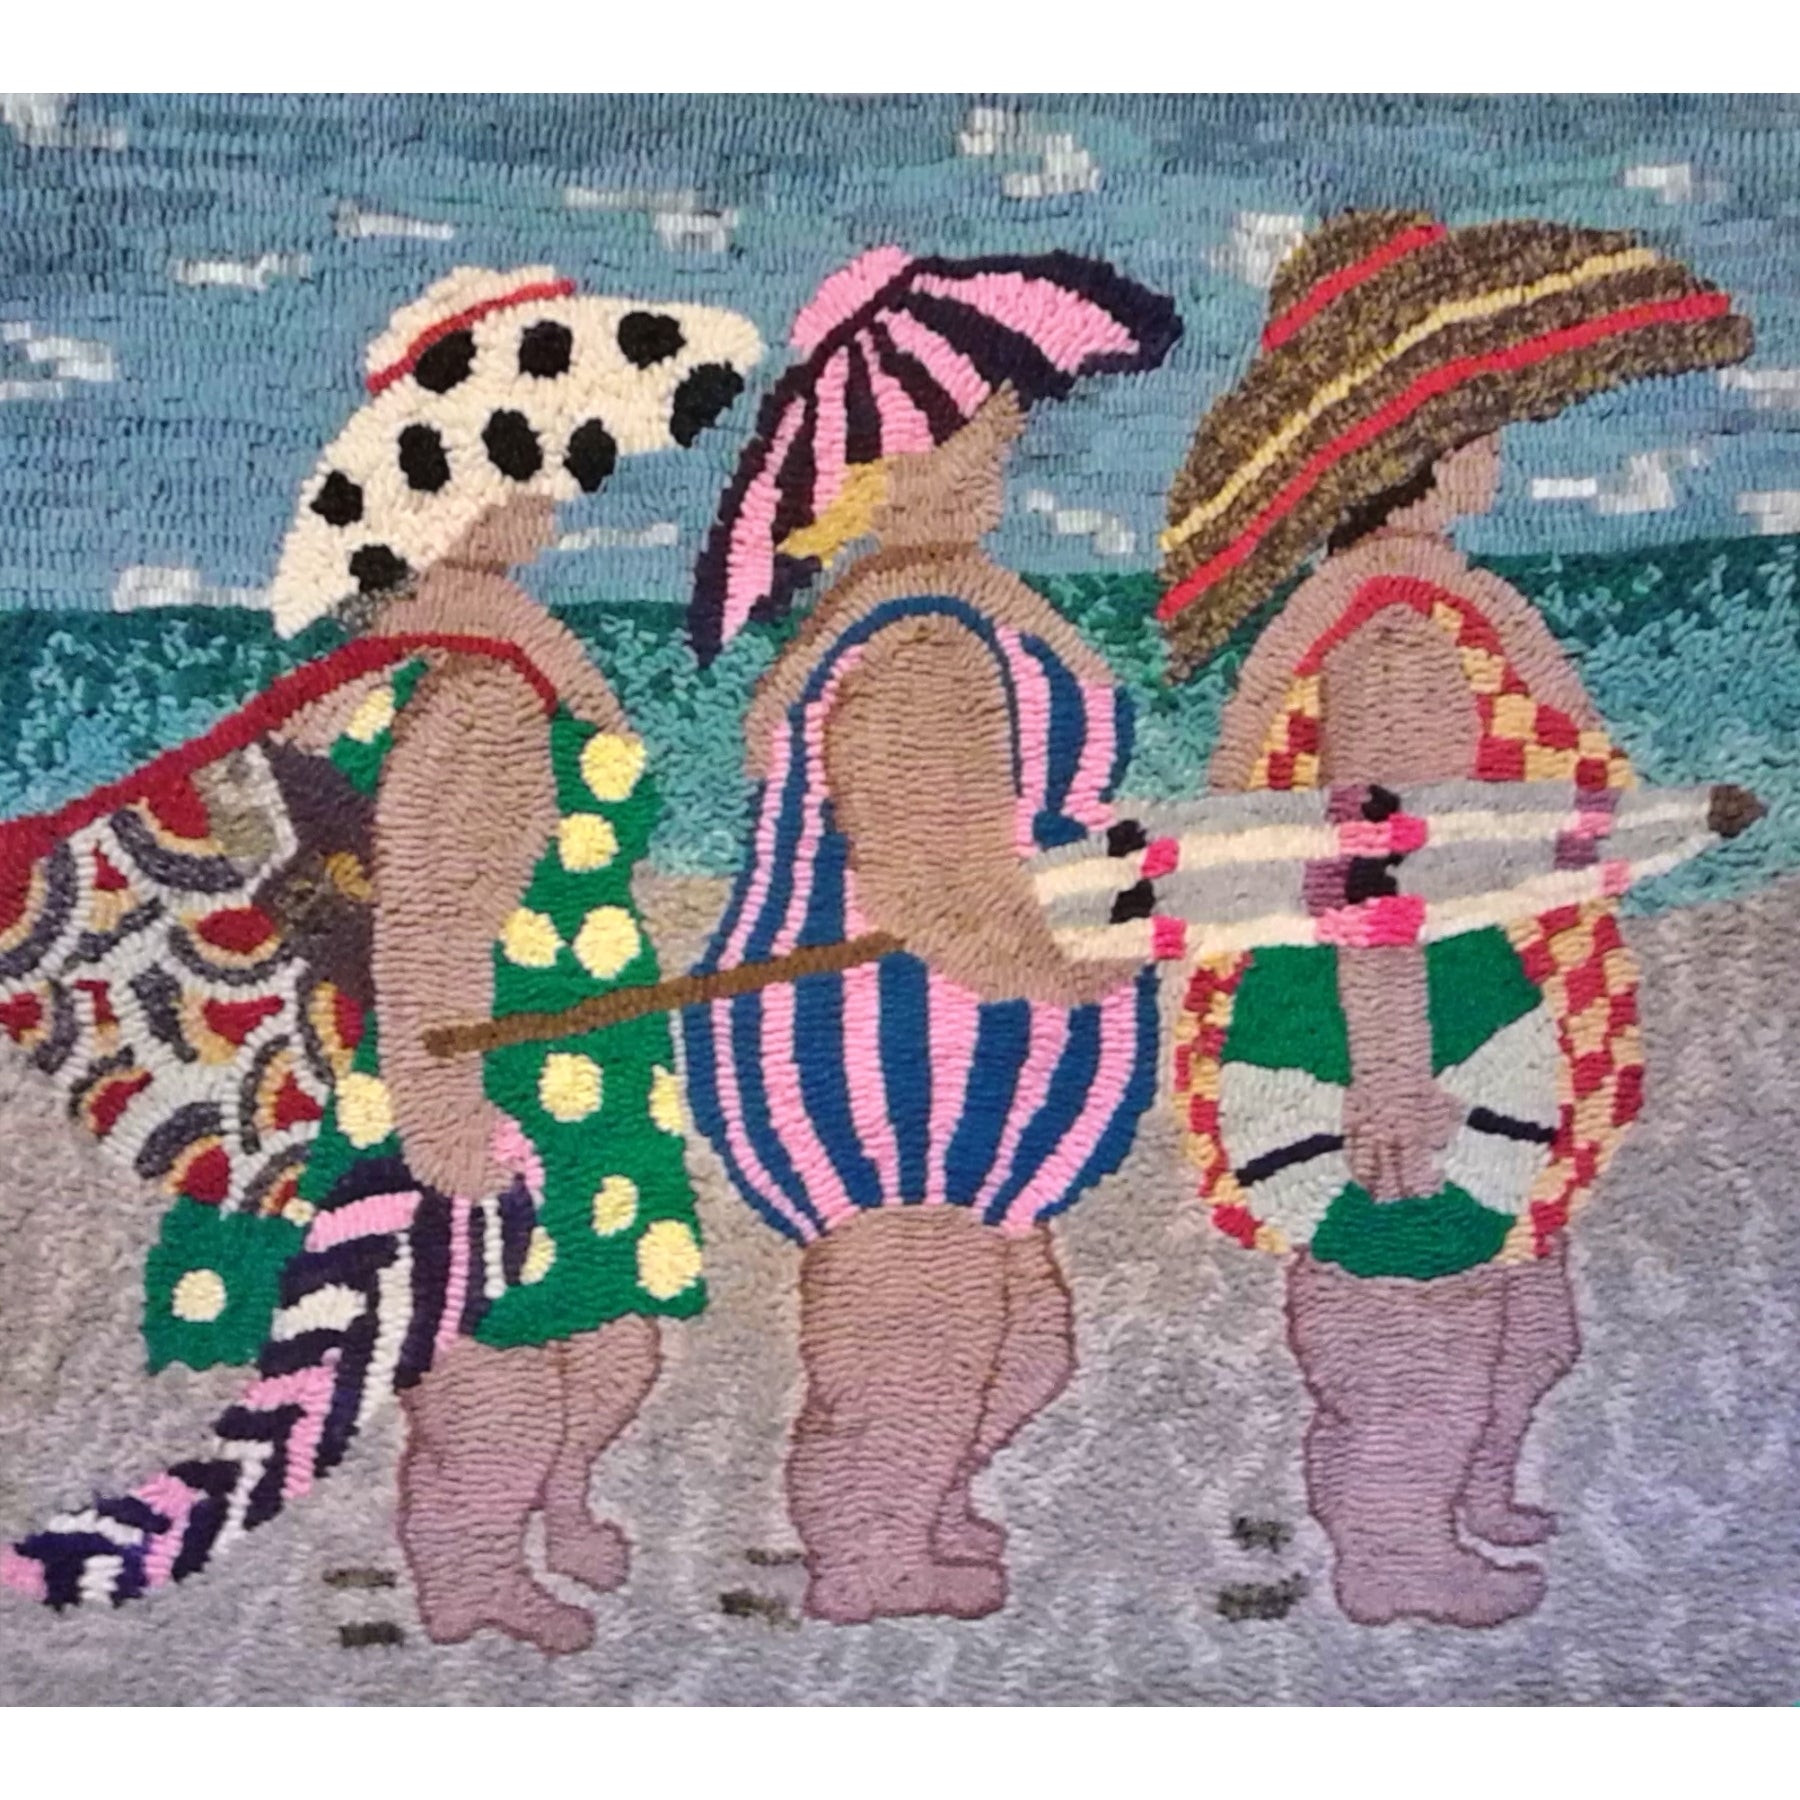 The Girls on the Beach, rug hooked by Chris Martin